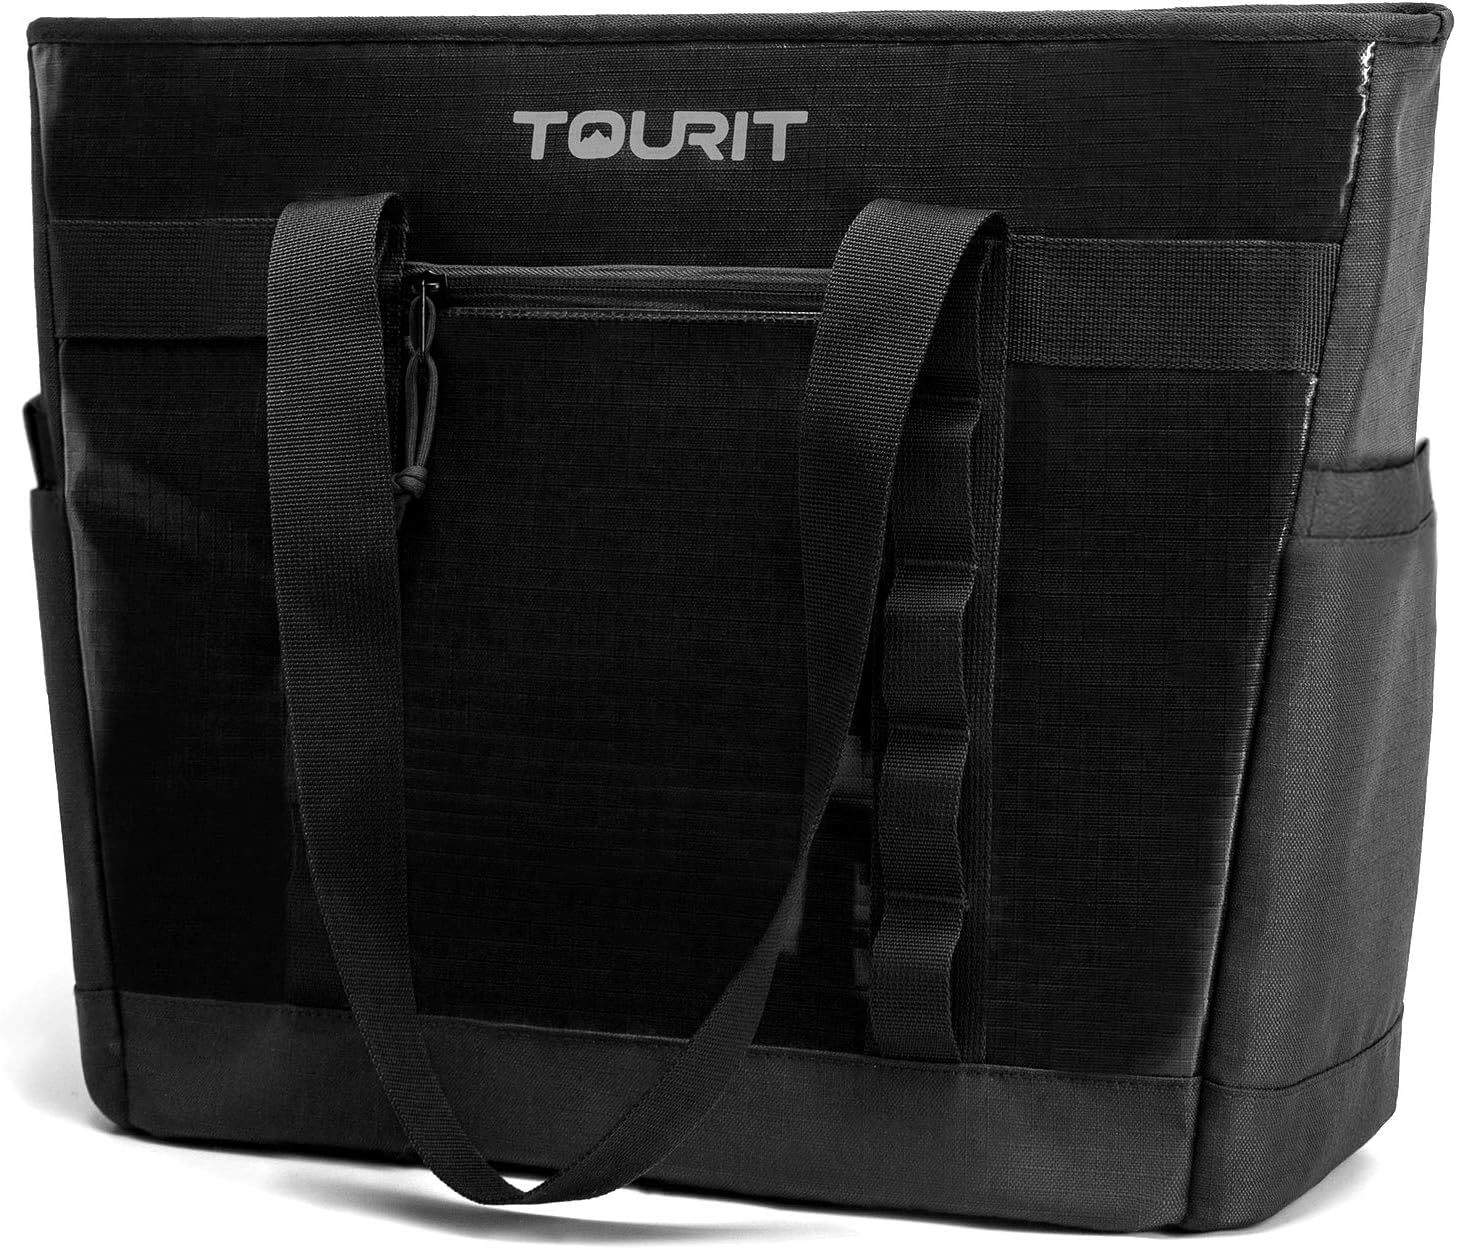 TOURIT Cooler Bag, 30 Cans Large Capacity Cooler Tote, Insulated Leakproof and Waterproof Lunch Bag, | Amazon (US)